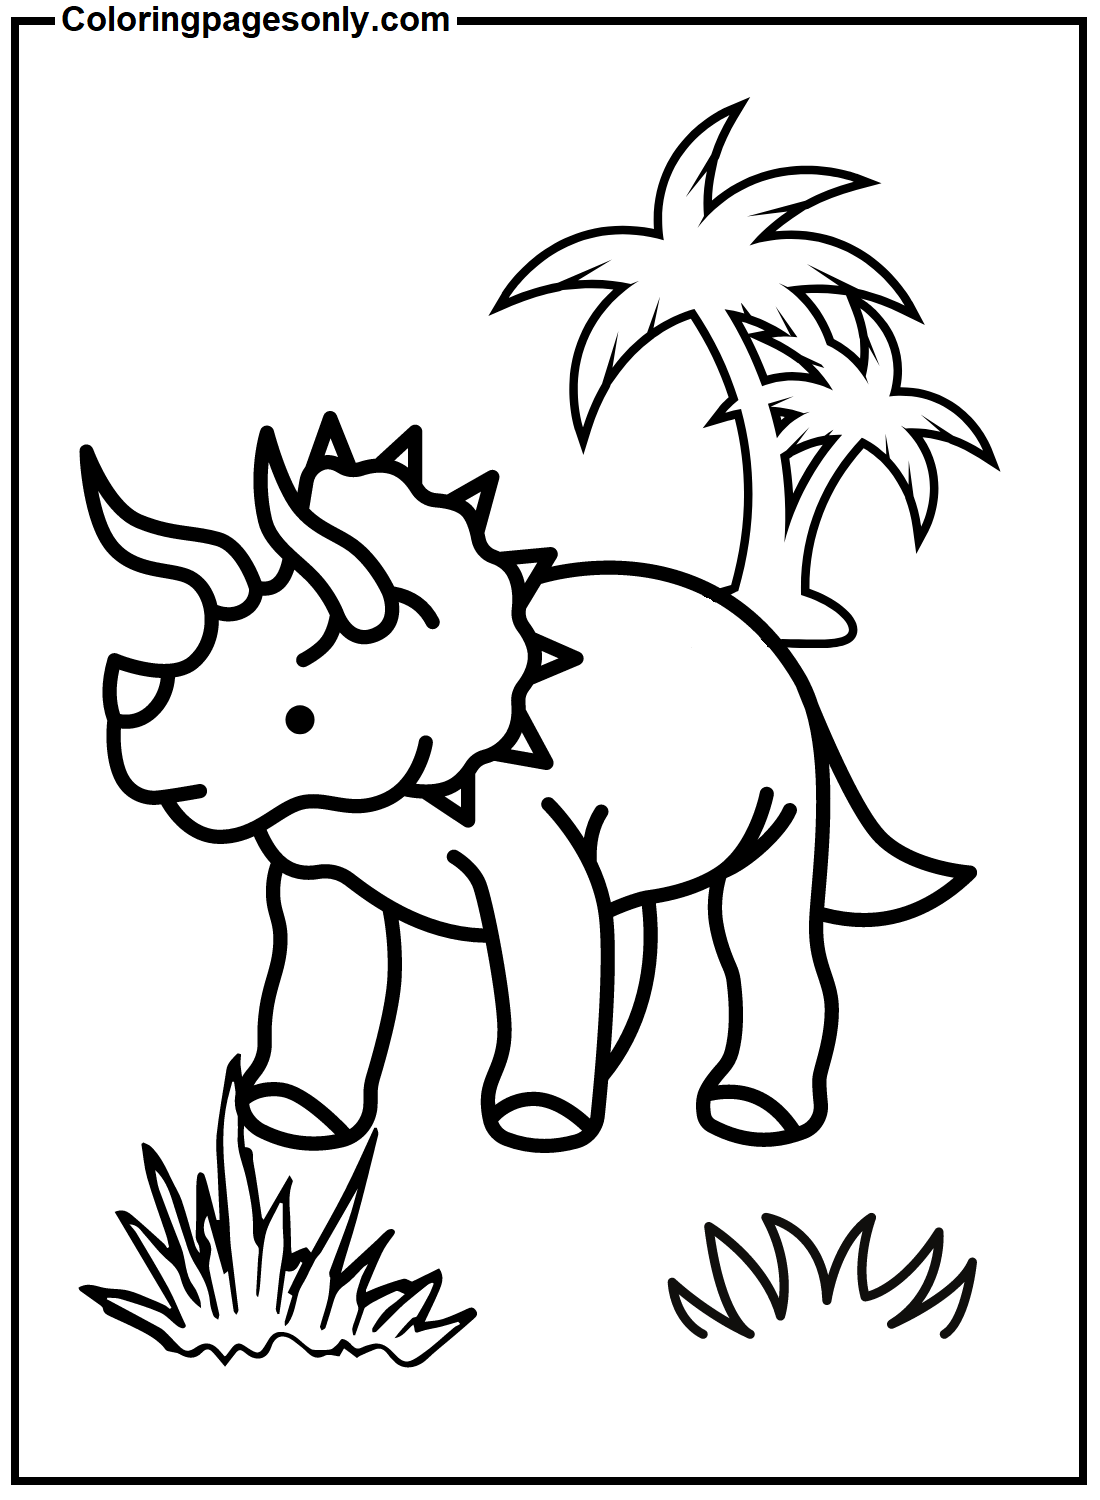 Triceratops Image Coloring Pages